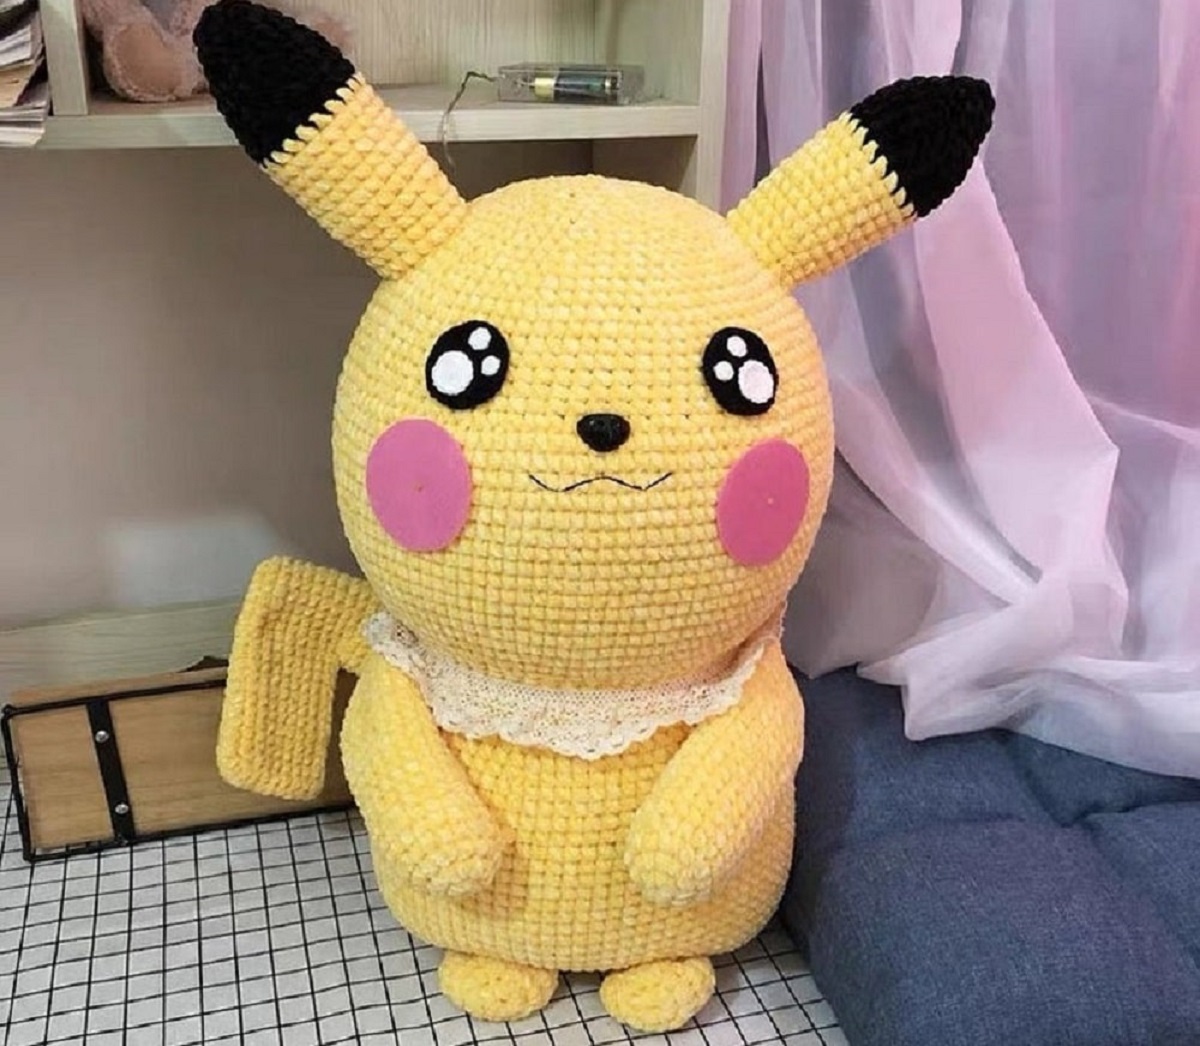 Large stuffed crochet Pickachu with small black and white eyes standing on a table and wearing a white lace collar. 